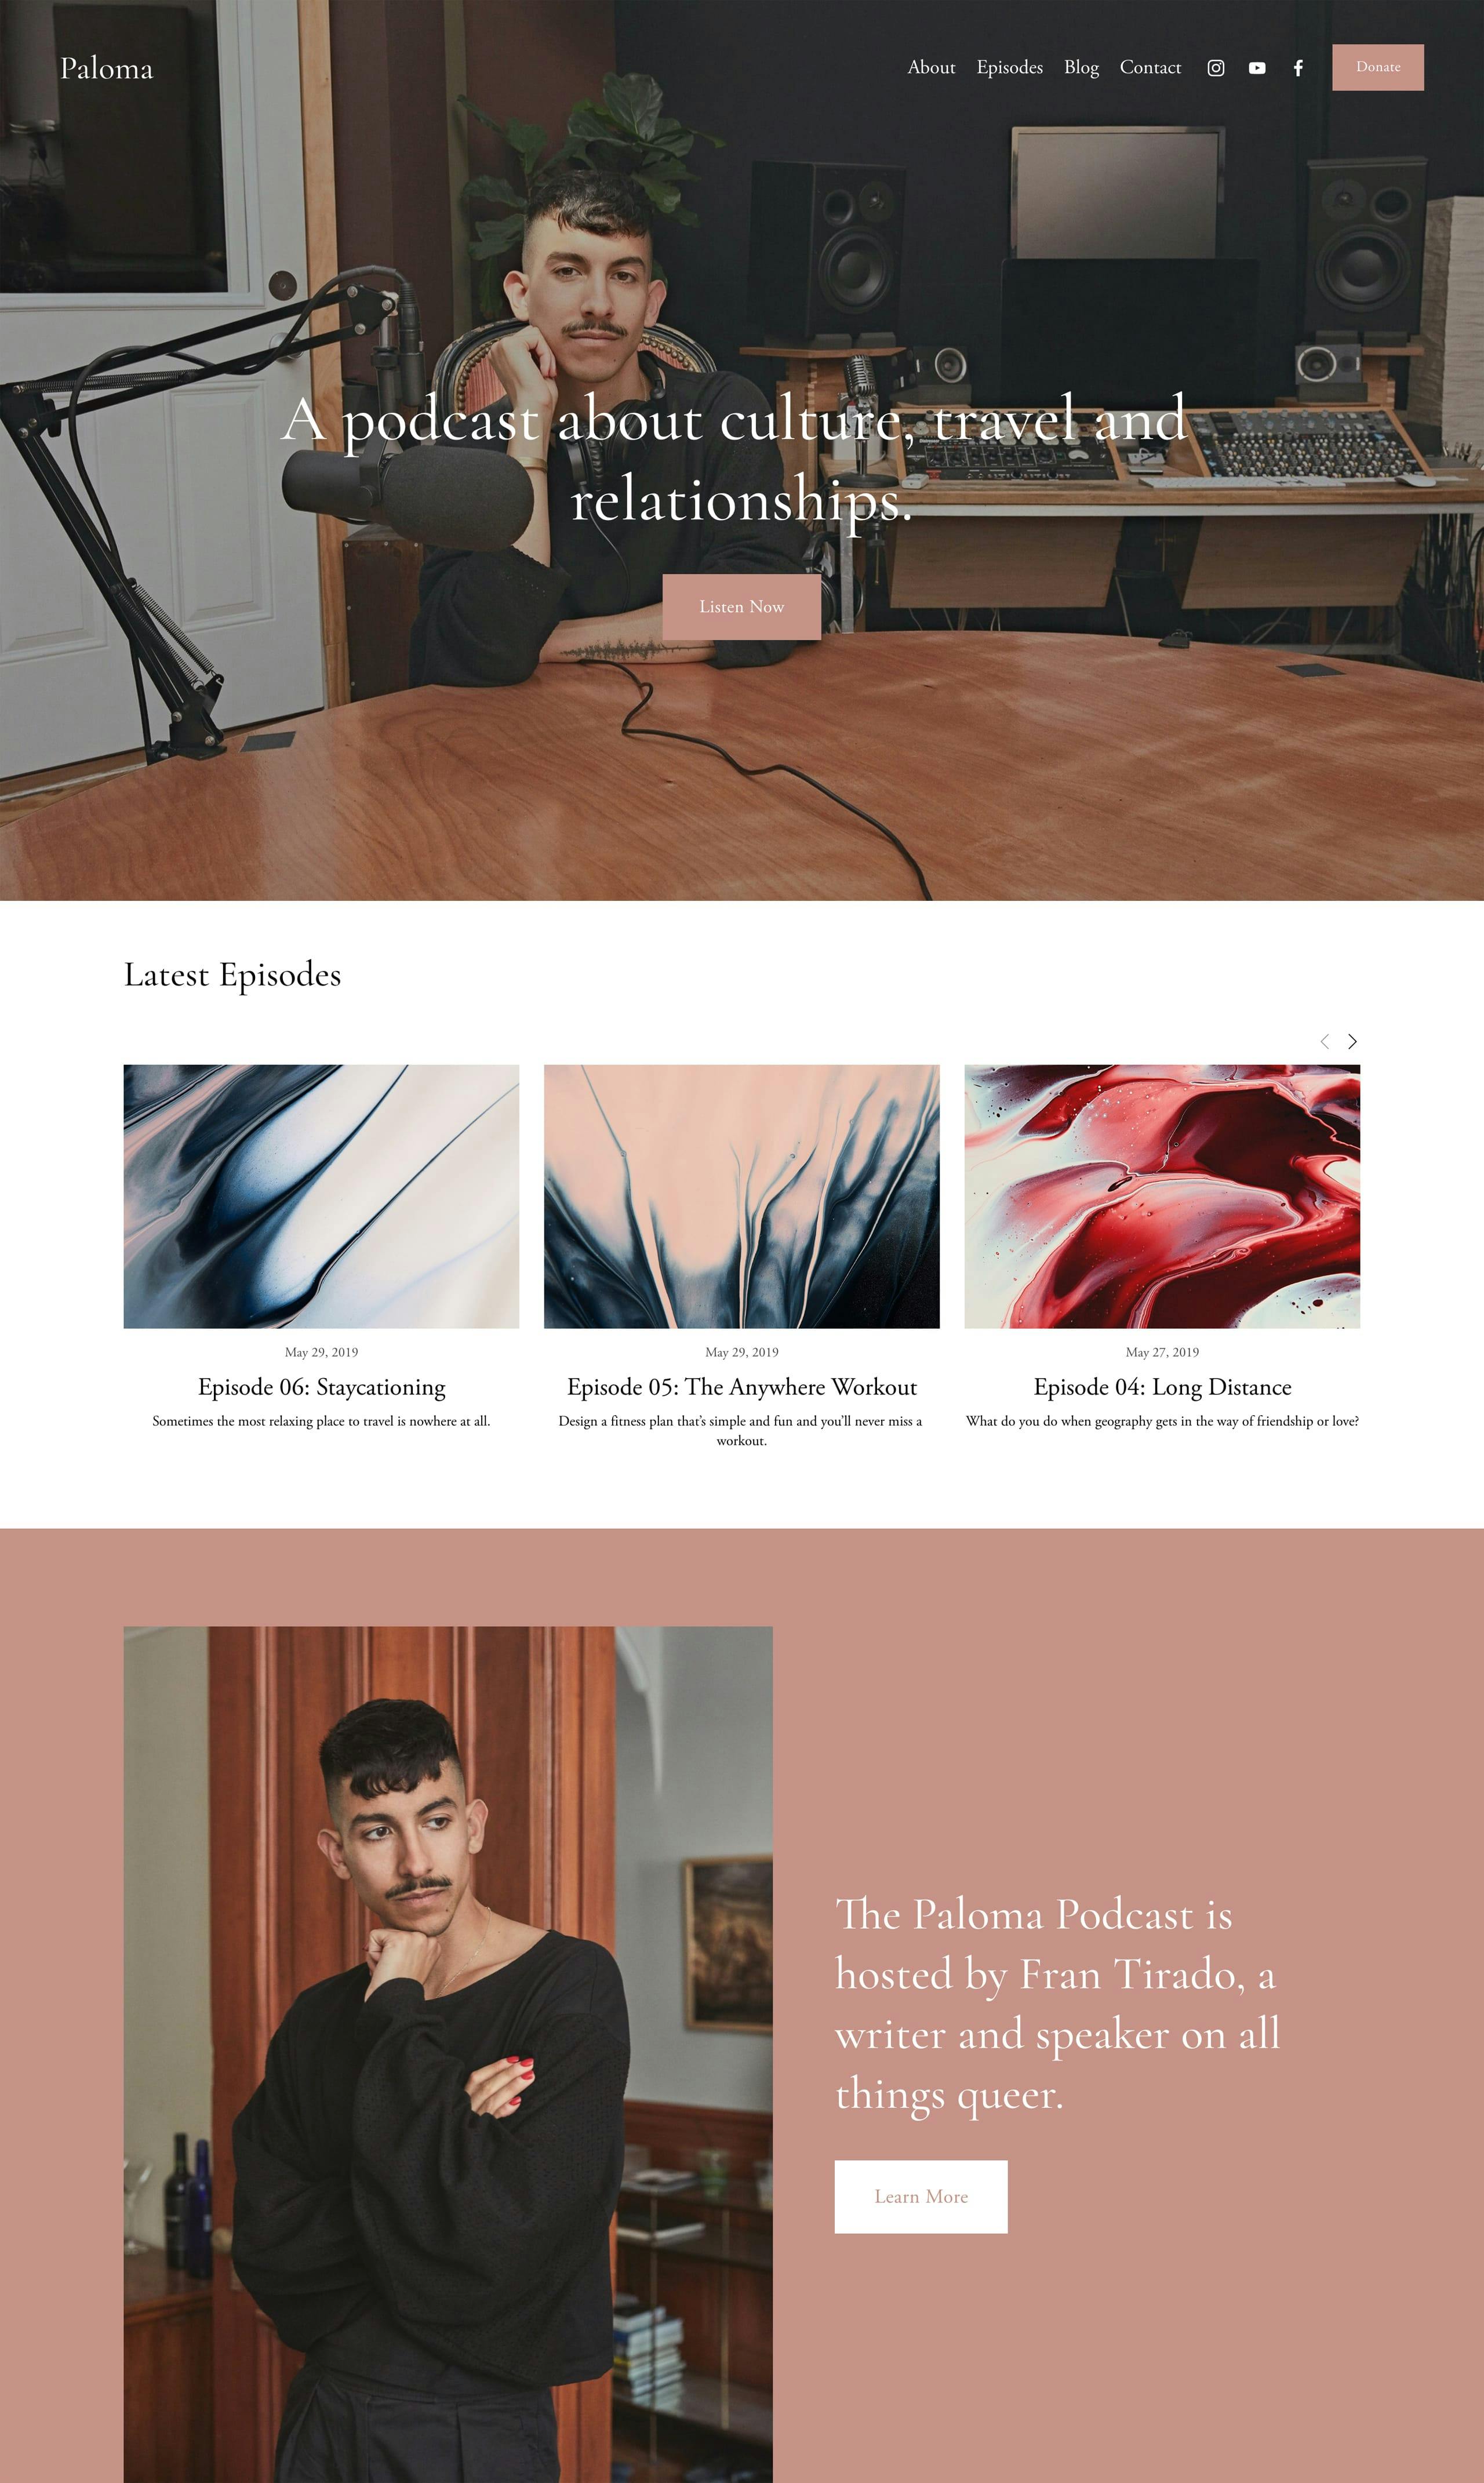 The Top Squarespace 7.1 Templates to get started online